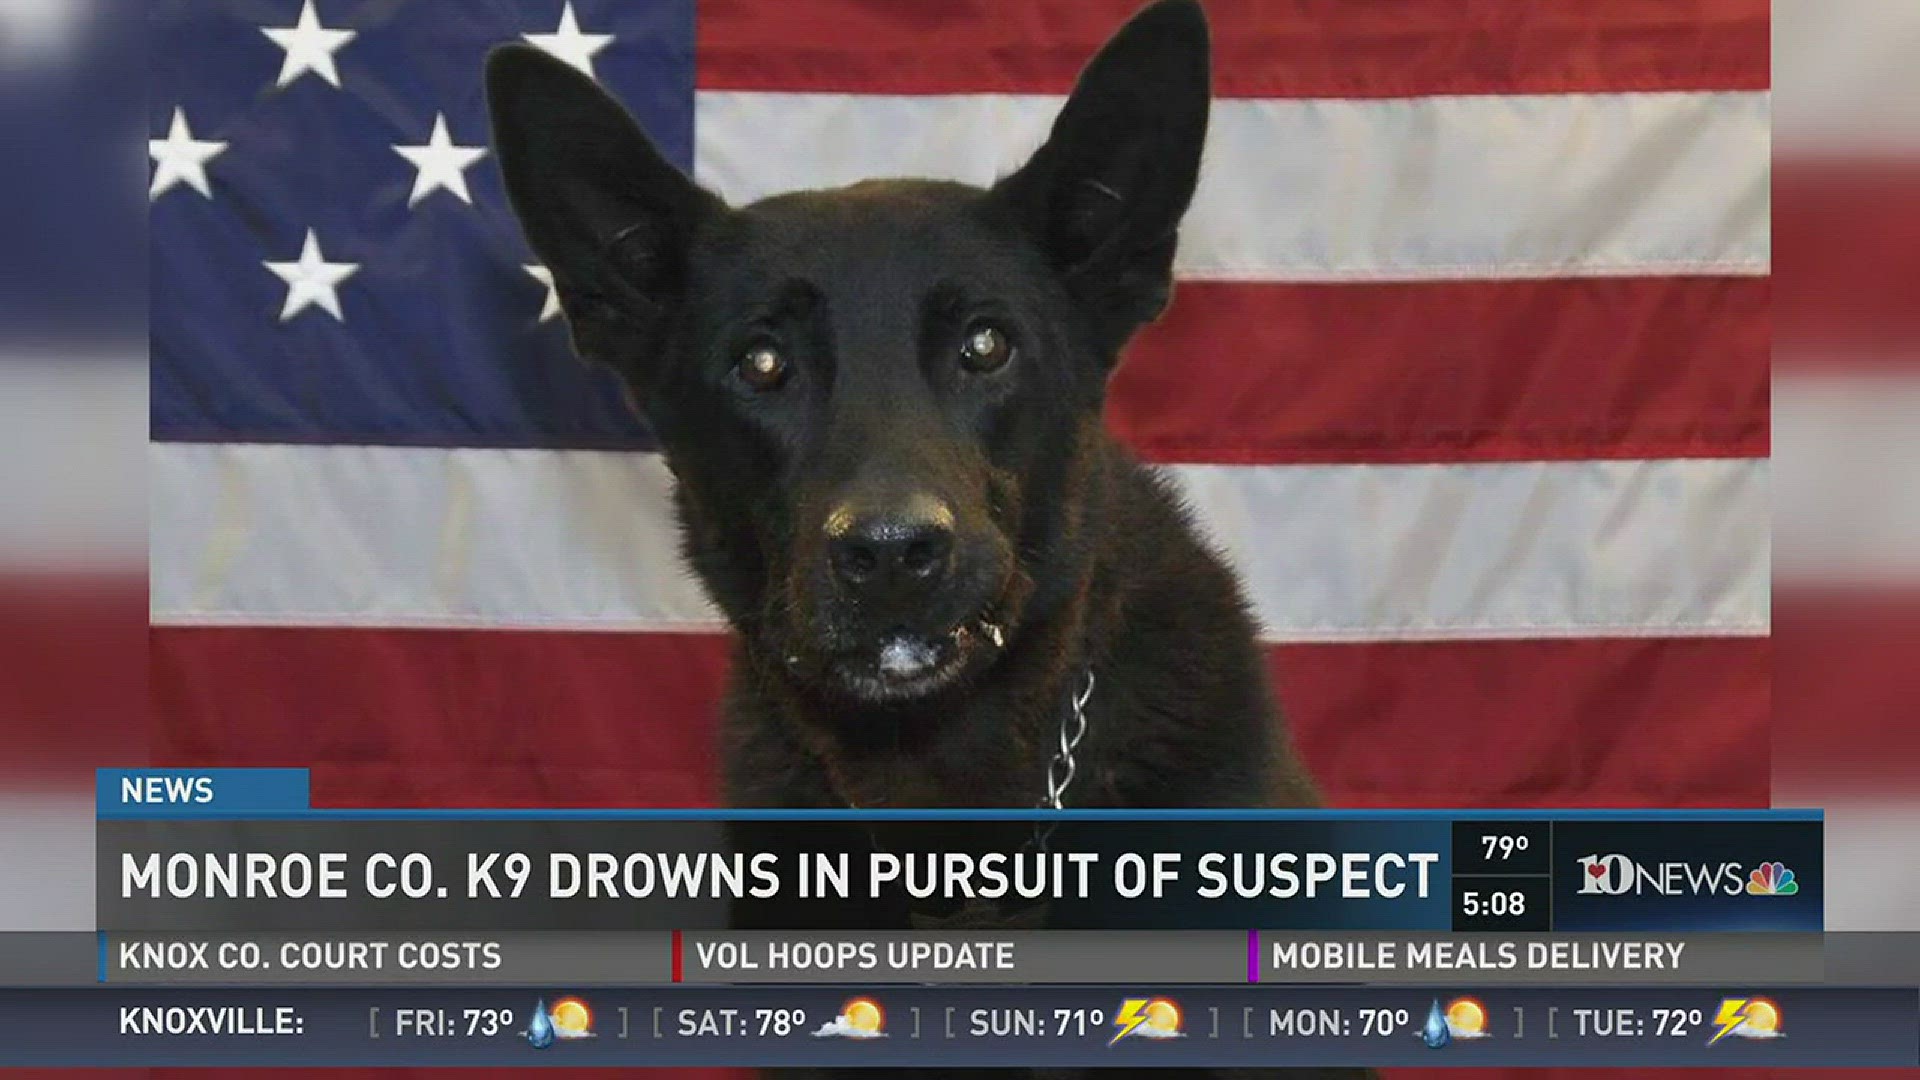 According to the Monroe County Sheriff's department, Deputy B.J. Johnson and his partner, K9 Vigor, were tracking a wanted man through the Cherokee National Forest when the K9 drowned. (3/10/16)